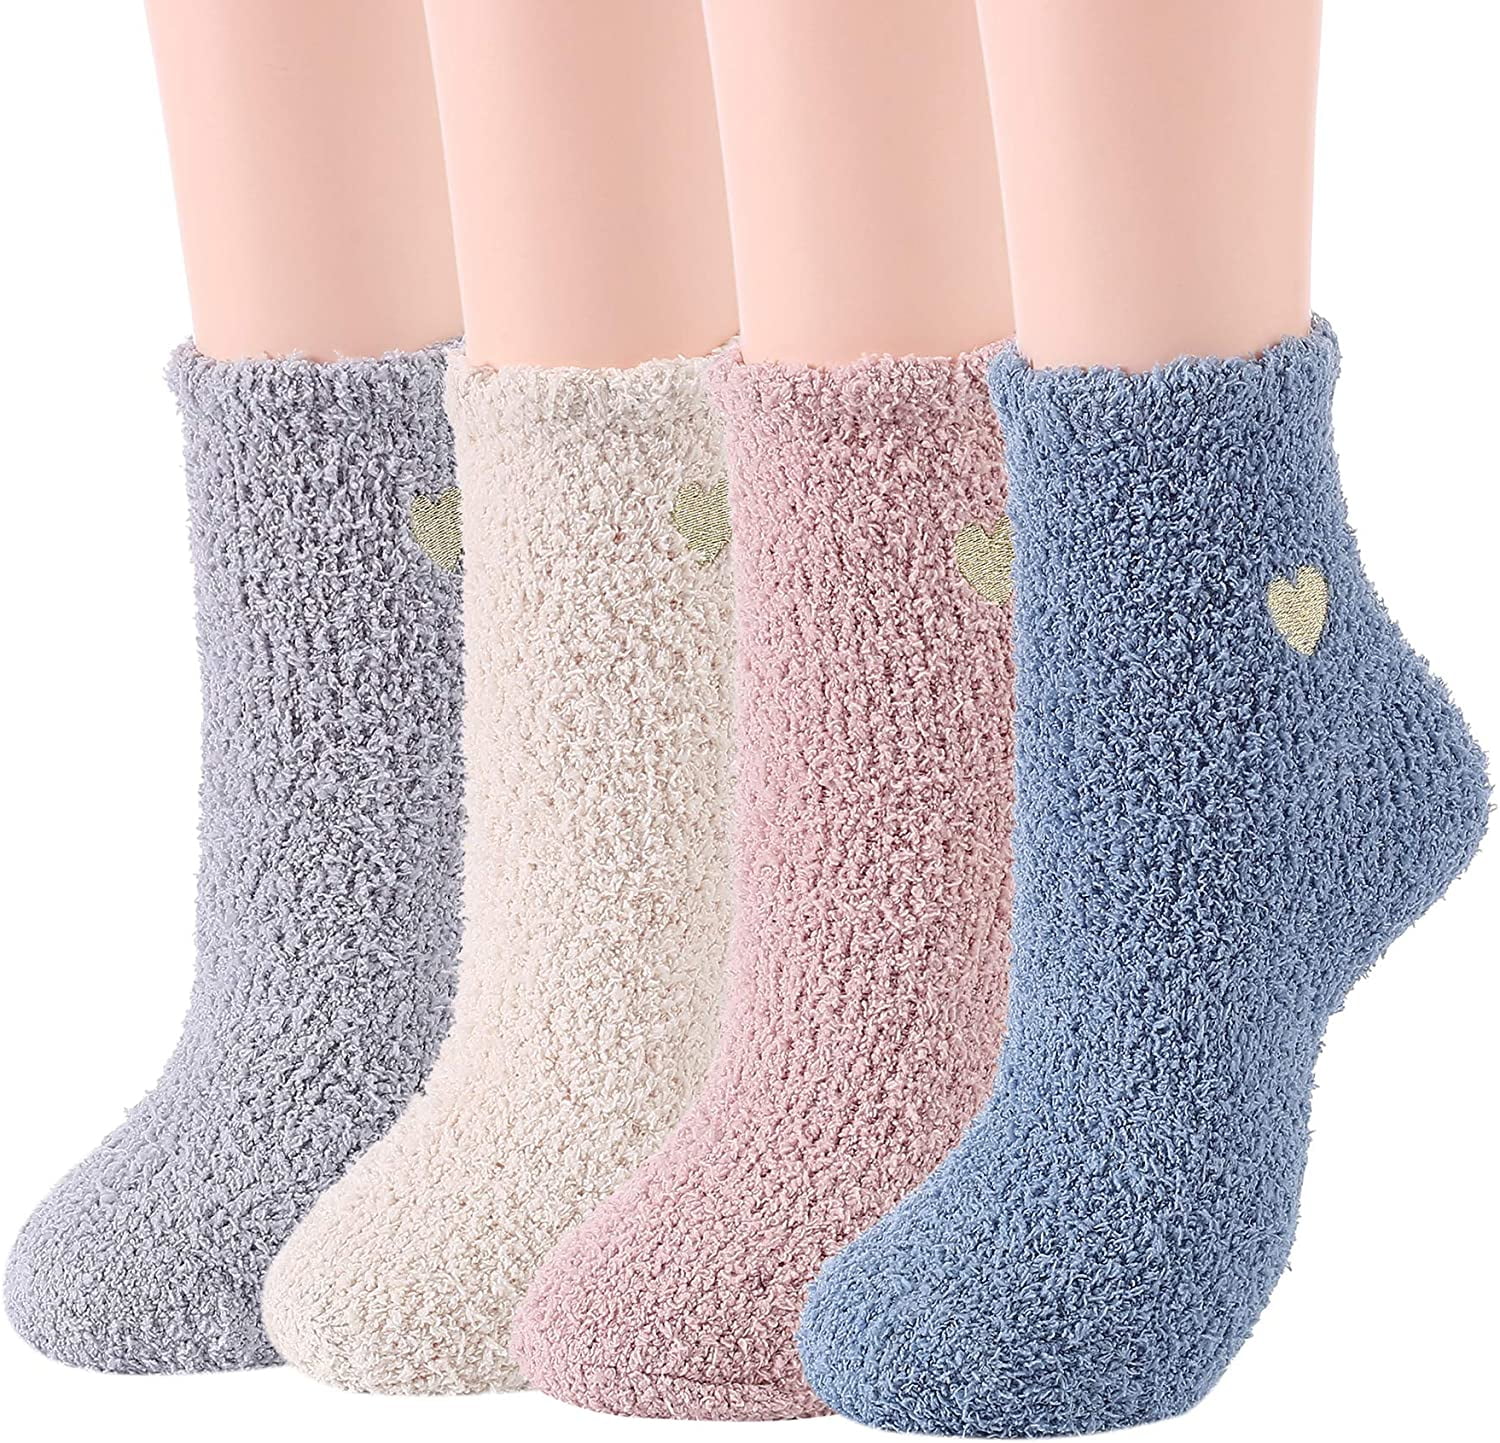 3 Pack Womens Fluffy Cute Warm Soft Fuzzy Cozy Thermal Low Cut Ankle Bed Socks 